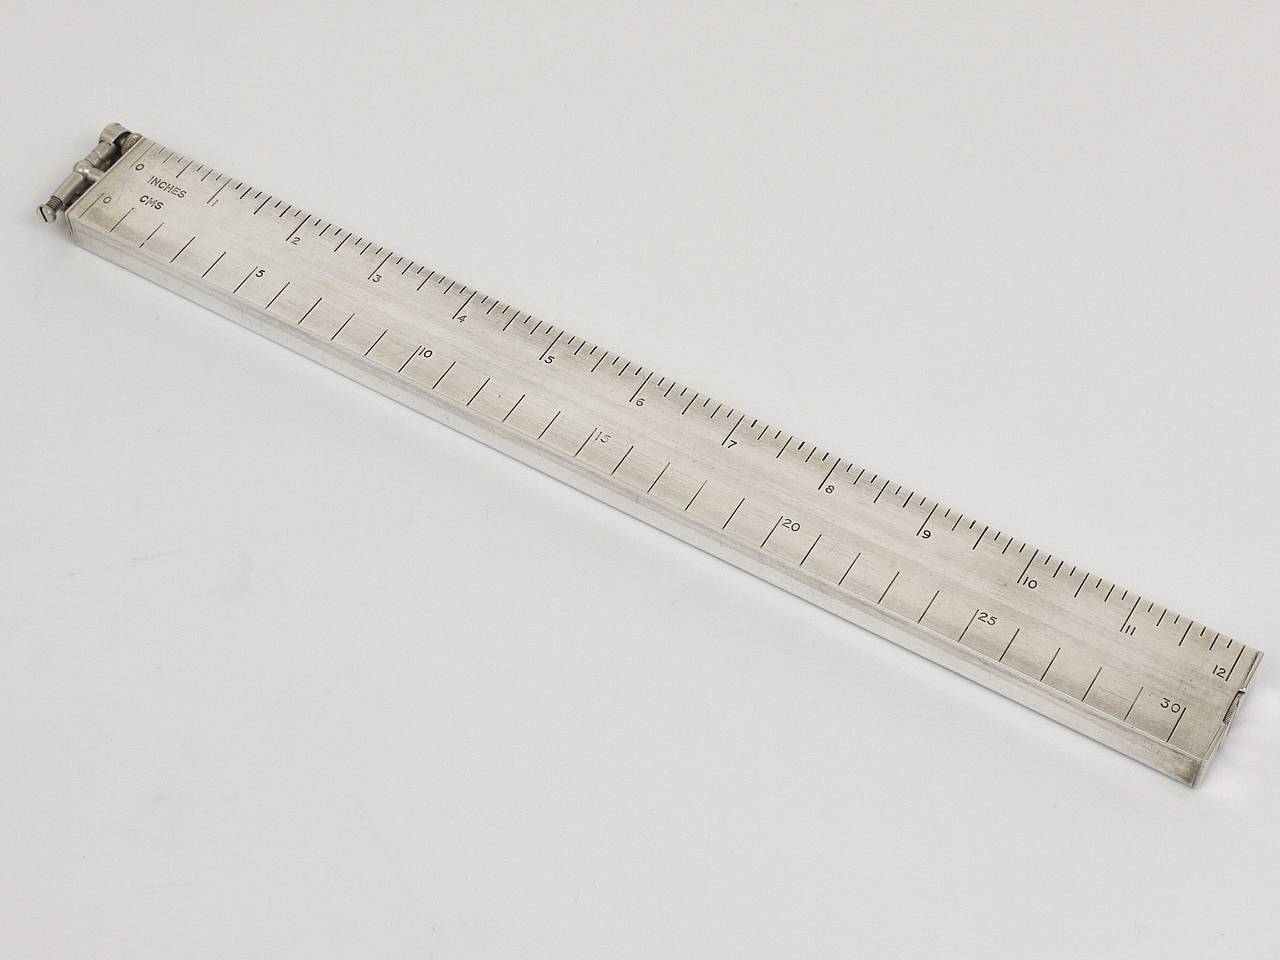 An unusual and rare silver-plated desk lighter in the shape of a ruler, with both inches and centimeter markings engraved. Made by Alfred Dunhill, England, 1950s. Works perfectly, in very good condition.  An ultimate desk accessory. Stamped